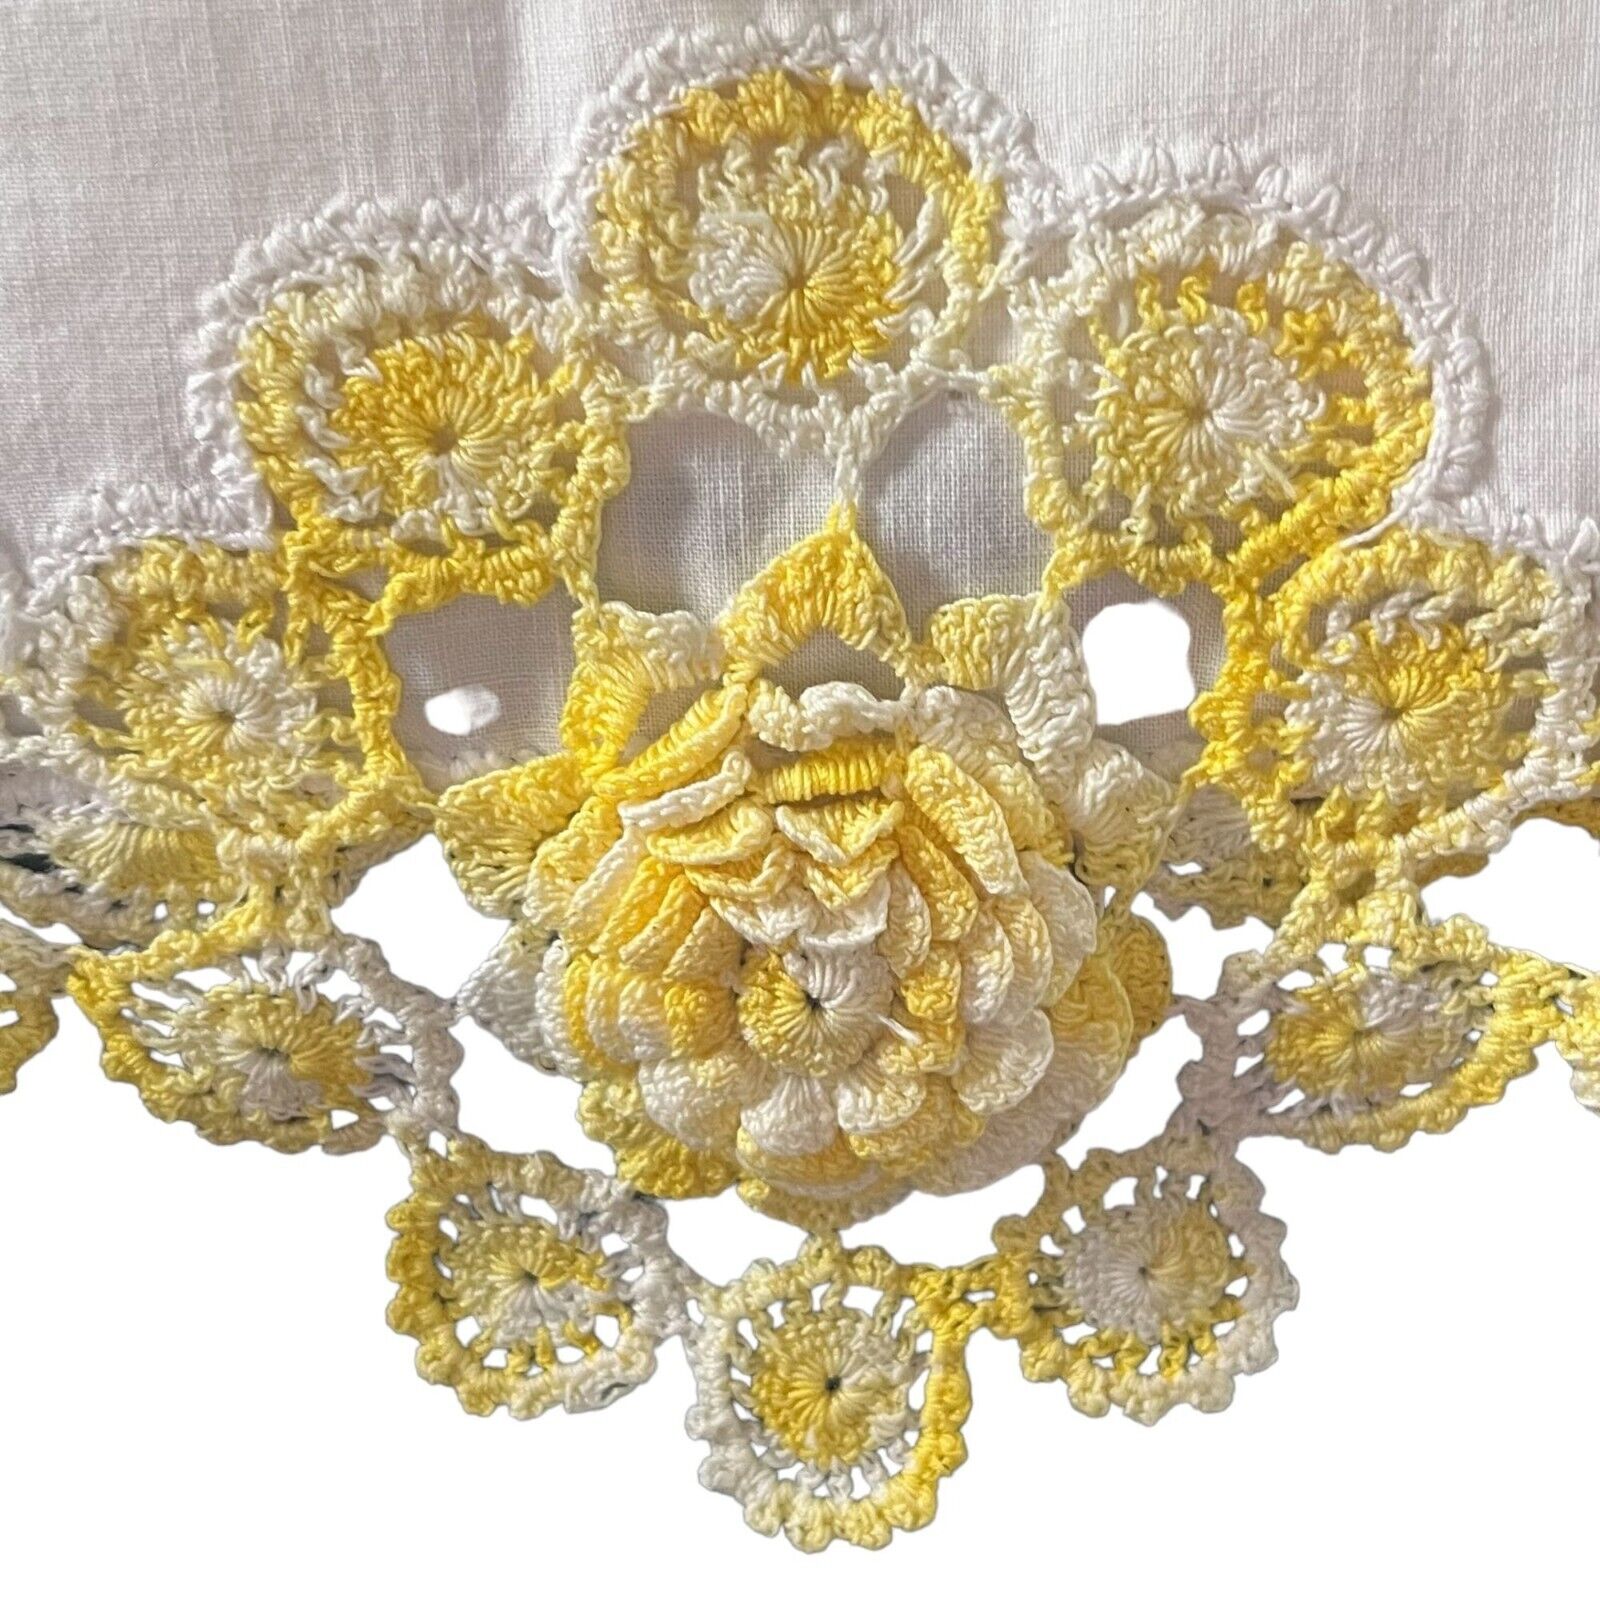 Vintage Crocheted King White Pillowcase Yellow Floral Design at pillow insert